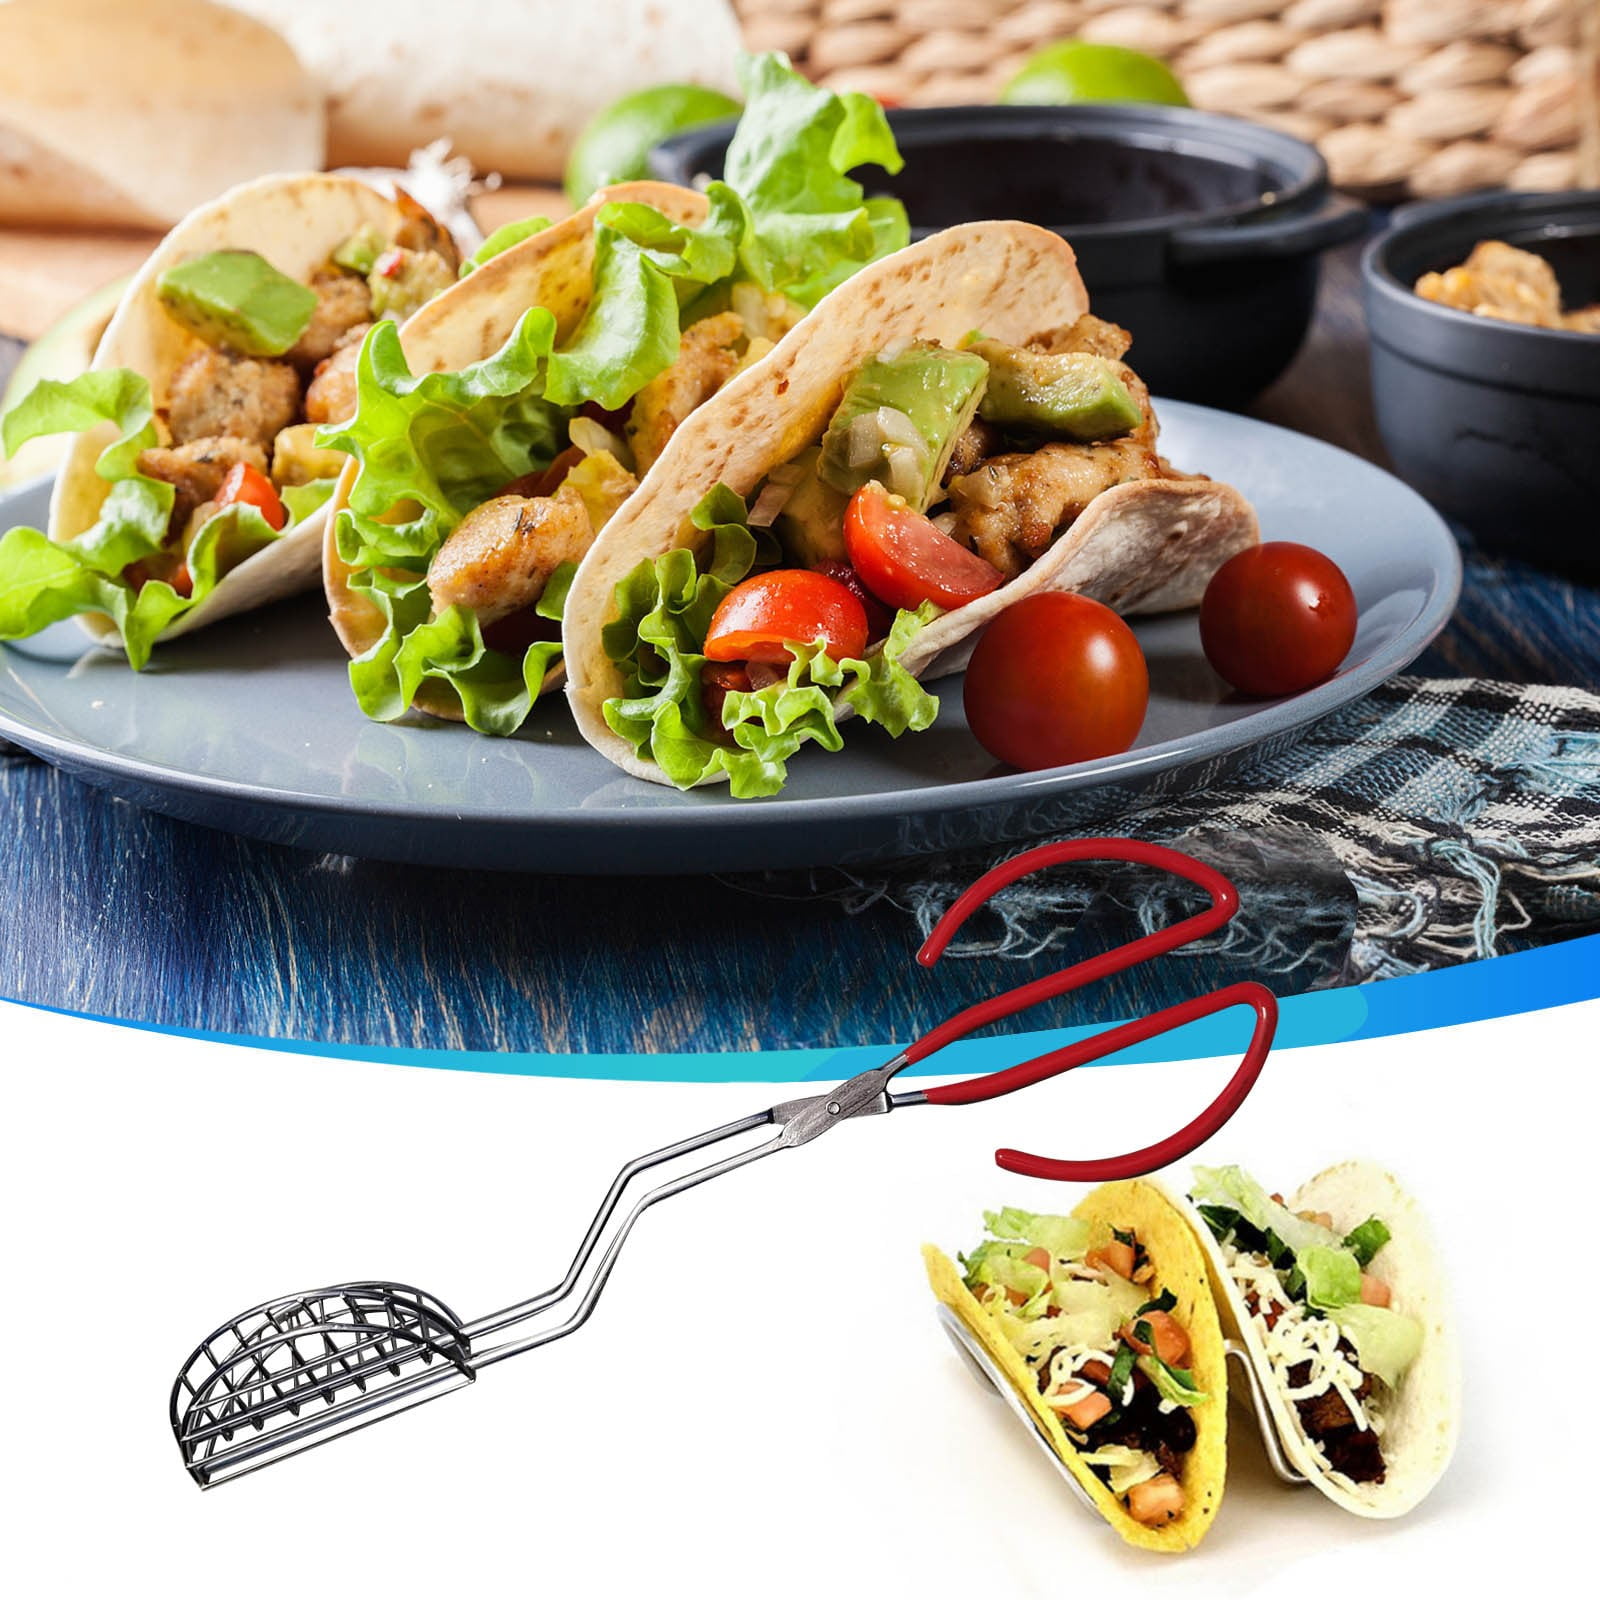 1 Crunchy Tortilla Shell With Stainless Steel Tortilla Maker And